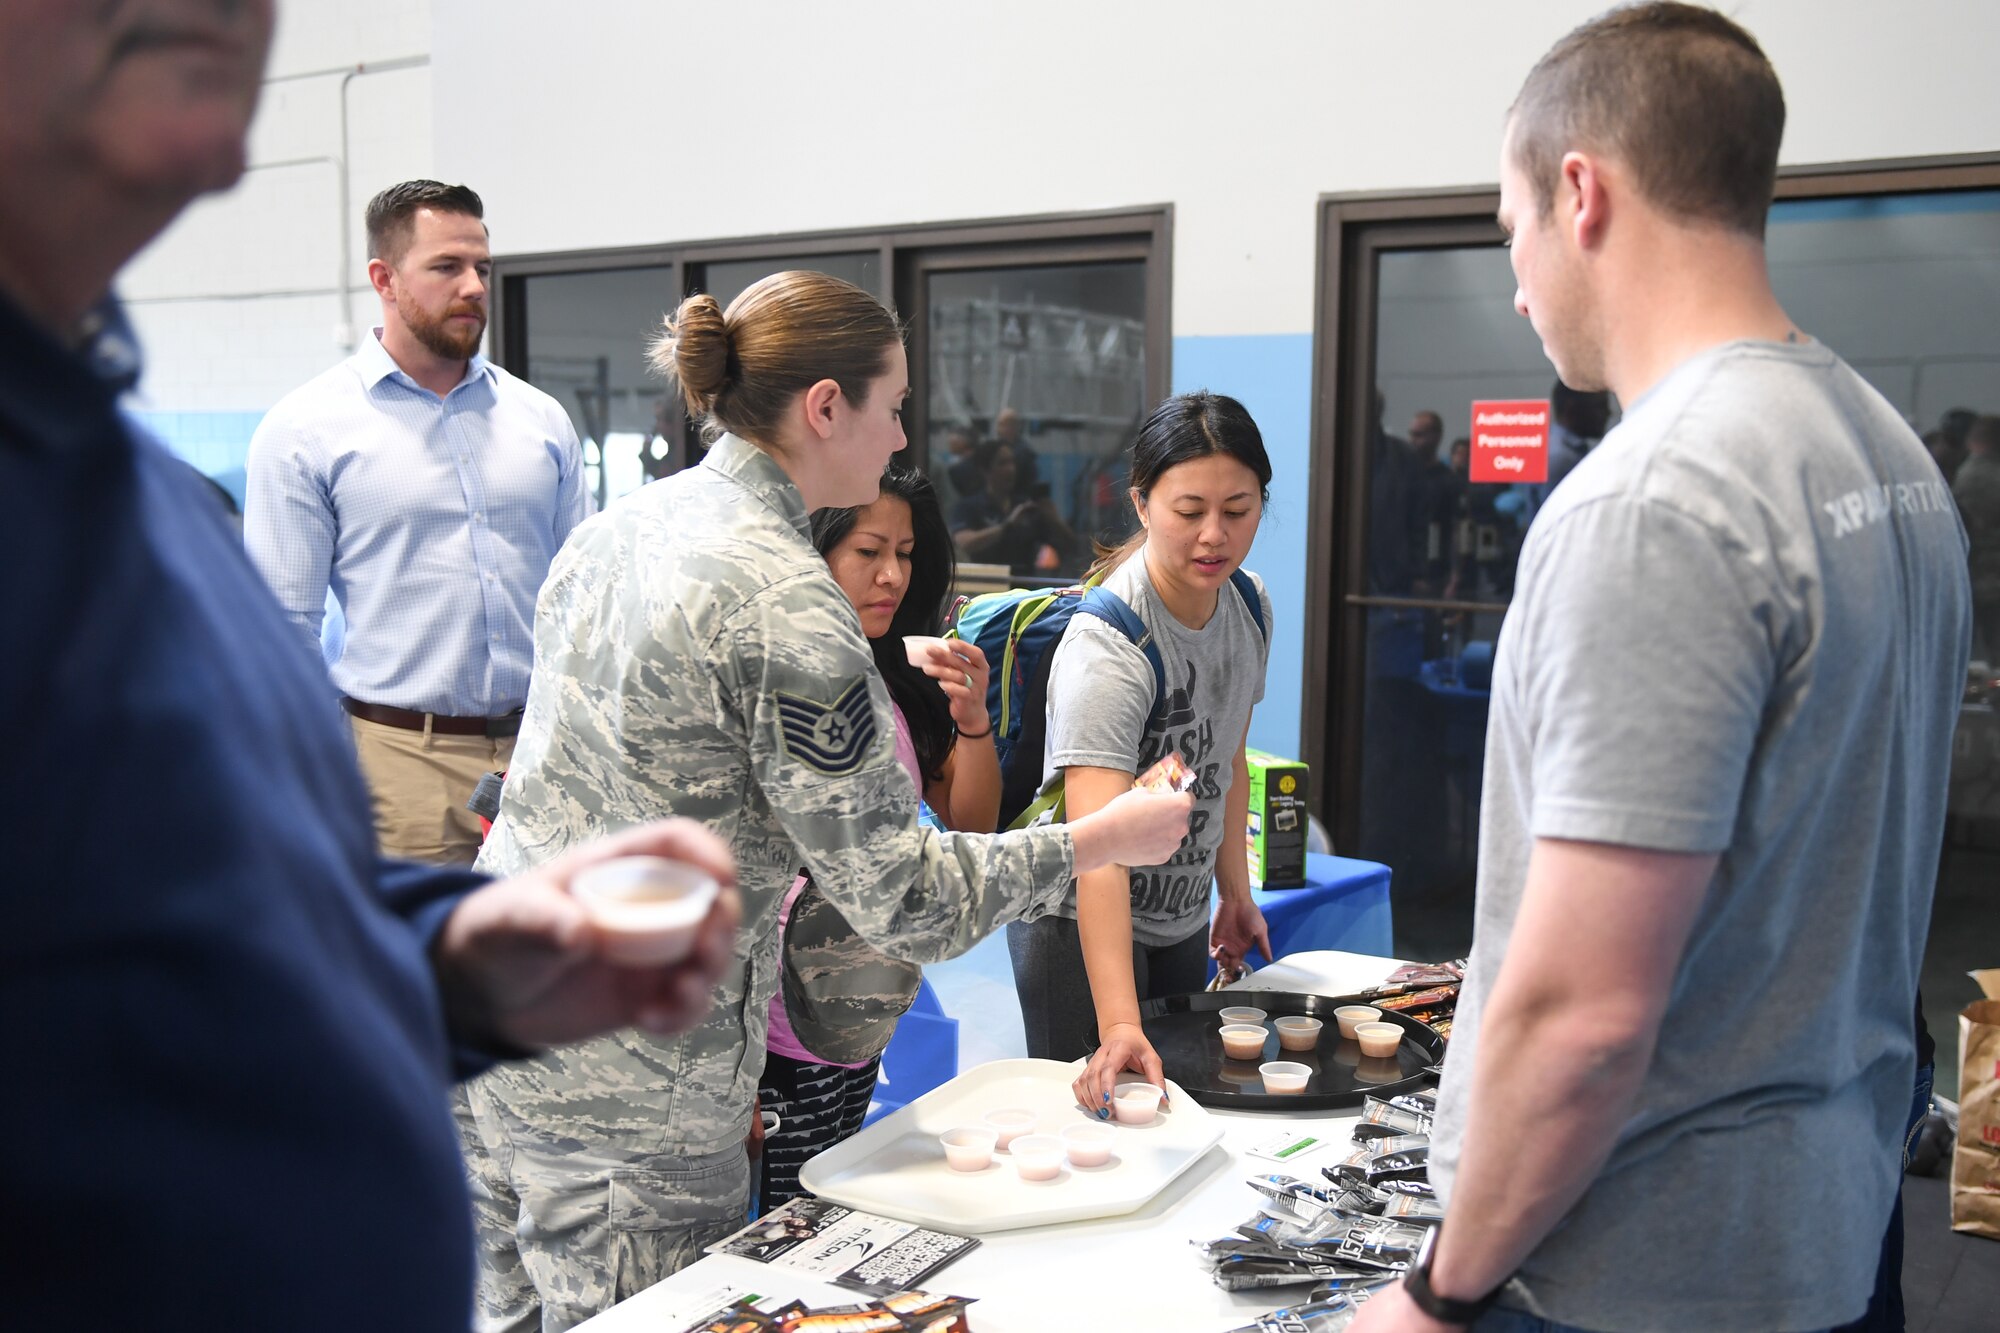 Attendees at the March 27, 2018, grand opening of the Hess Fitness Center's new functional training area at Hill Air Force Base, Utah, grab free protein shake samples. (U.S. Air Force photo by Cynthia Griggs)